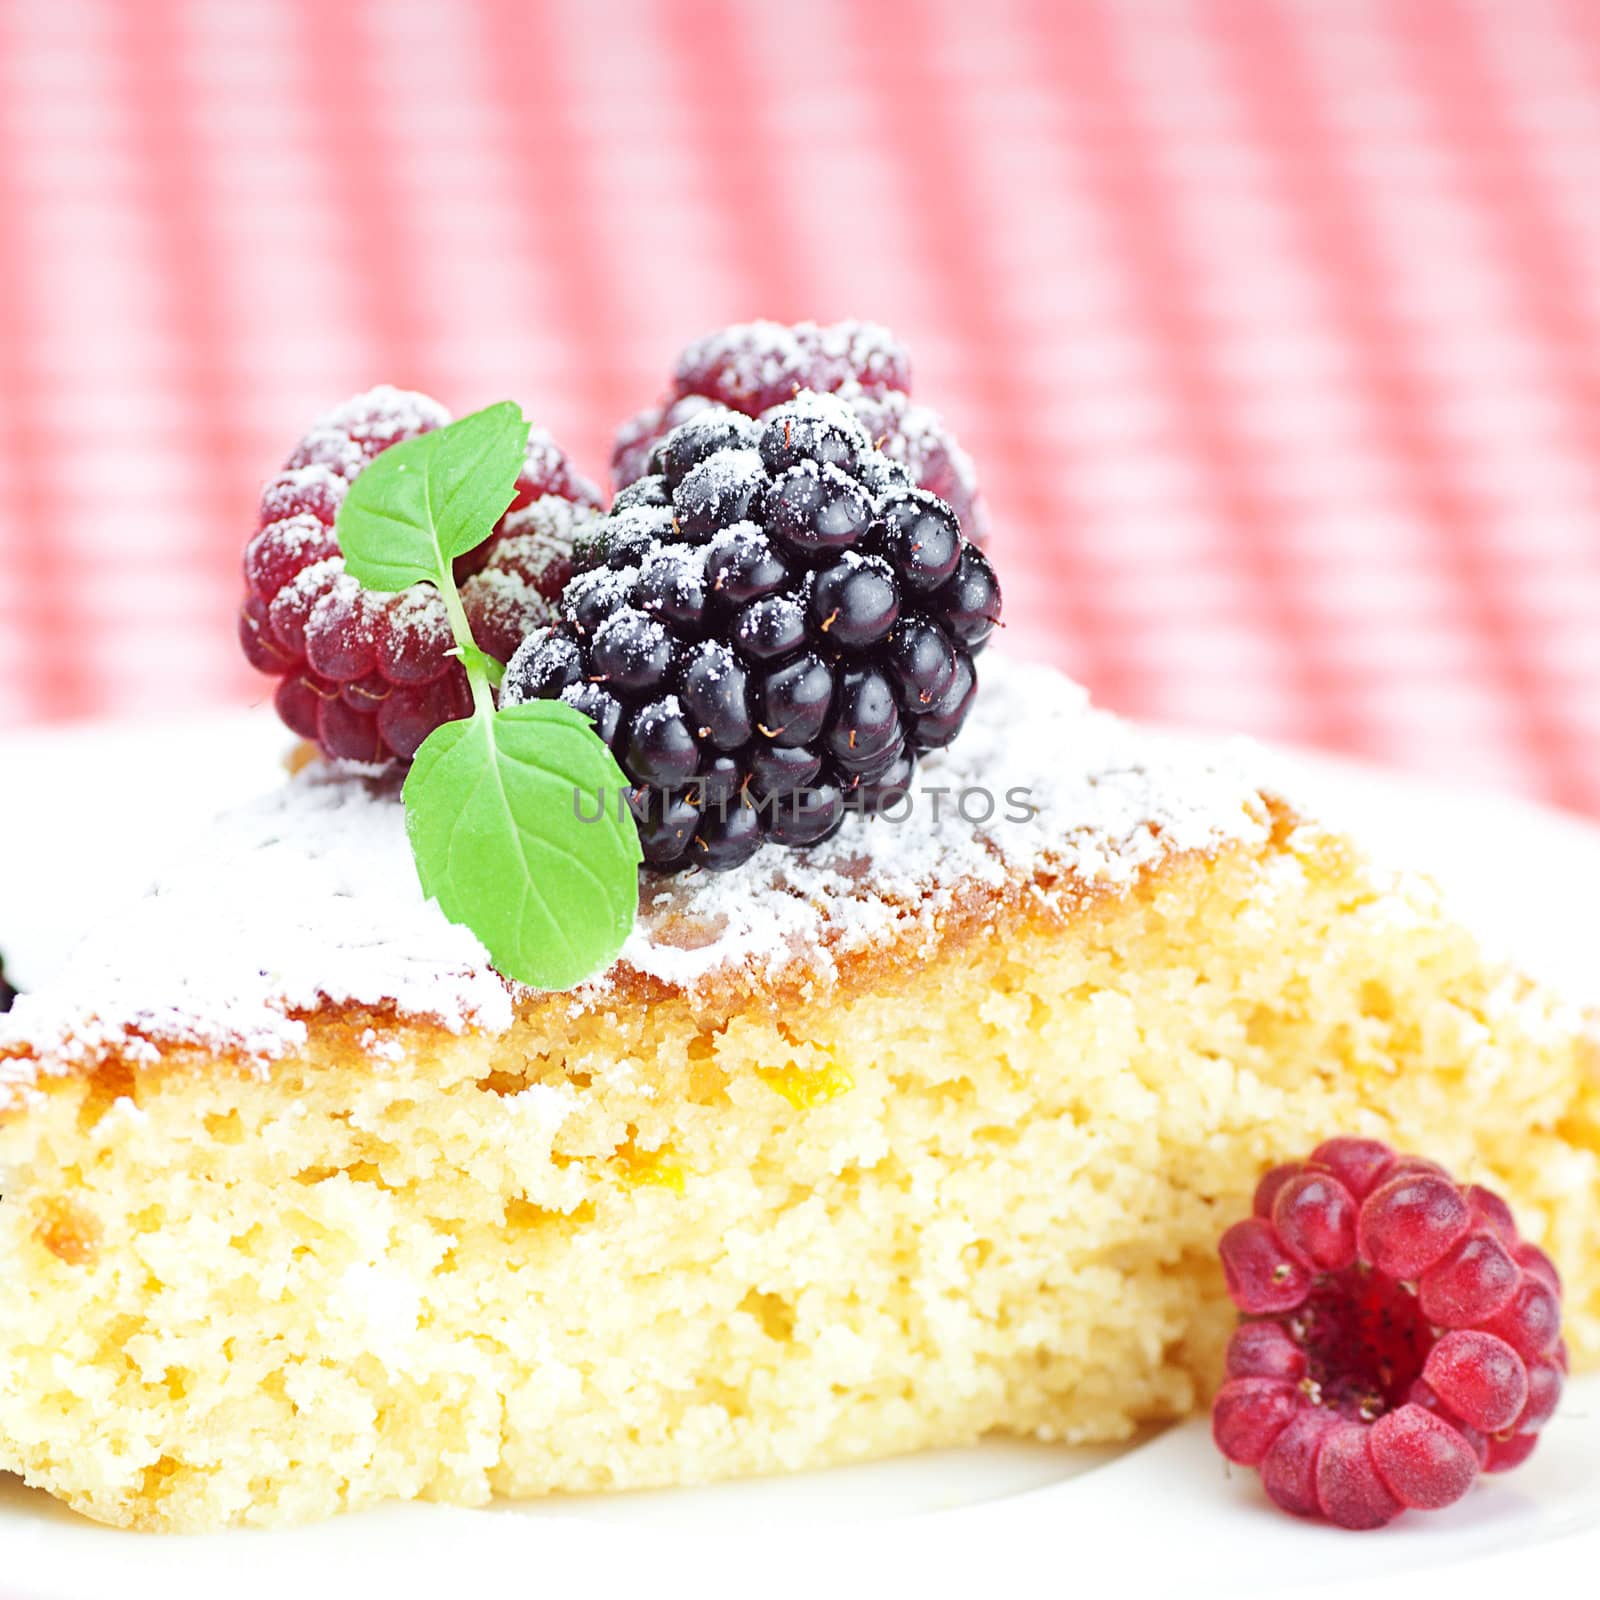 cake with icing, raspberry, blackberry and mint on a plate on pl by jannyjus